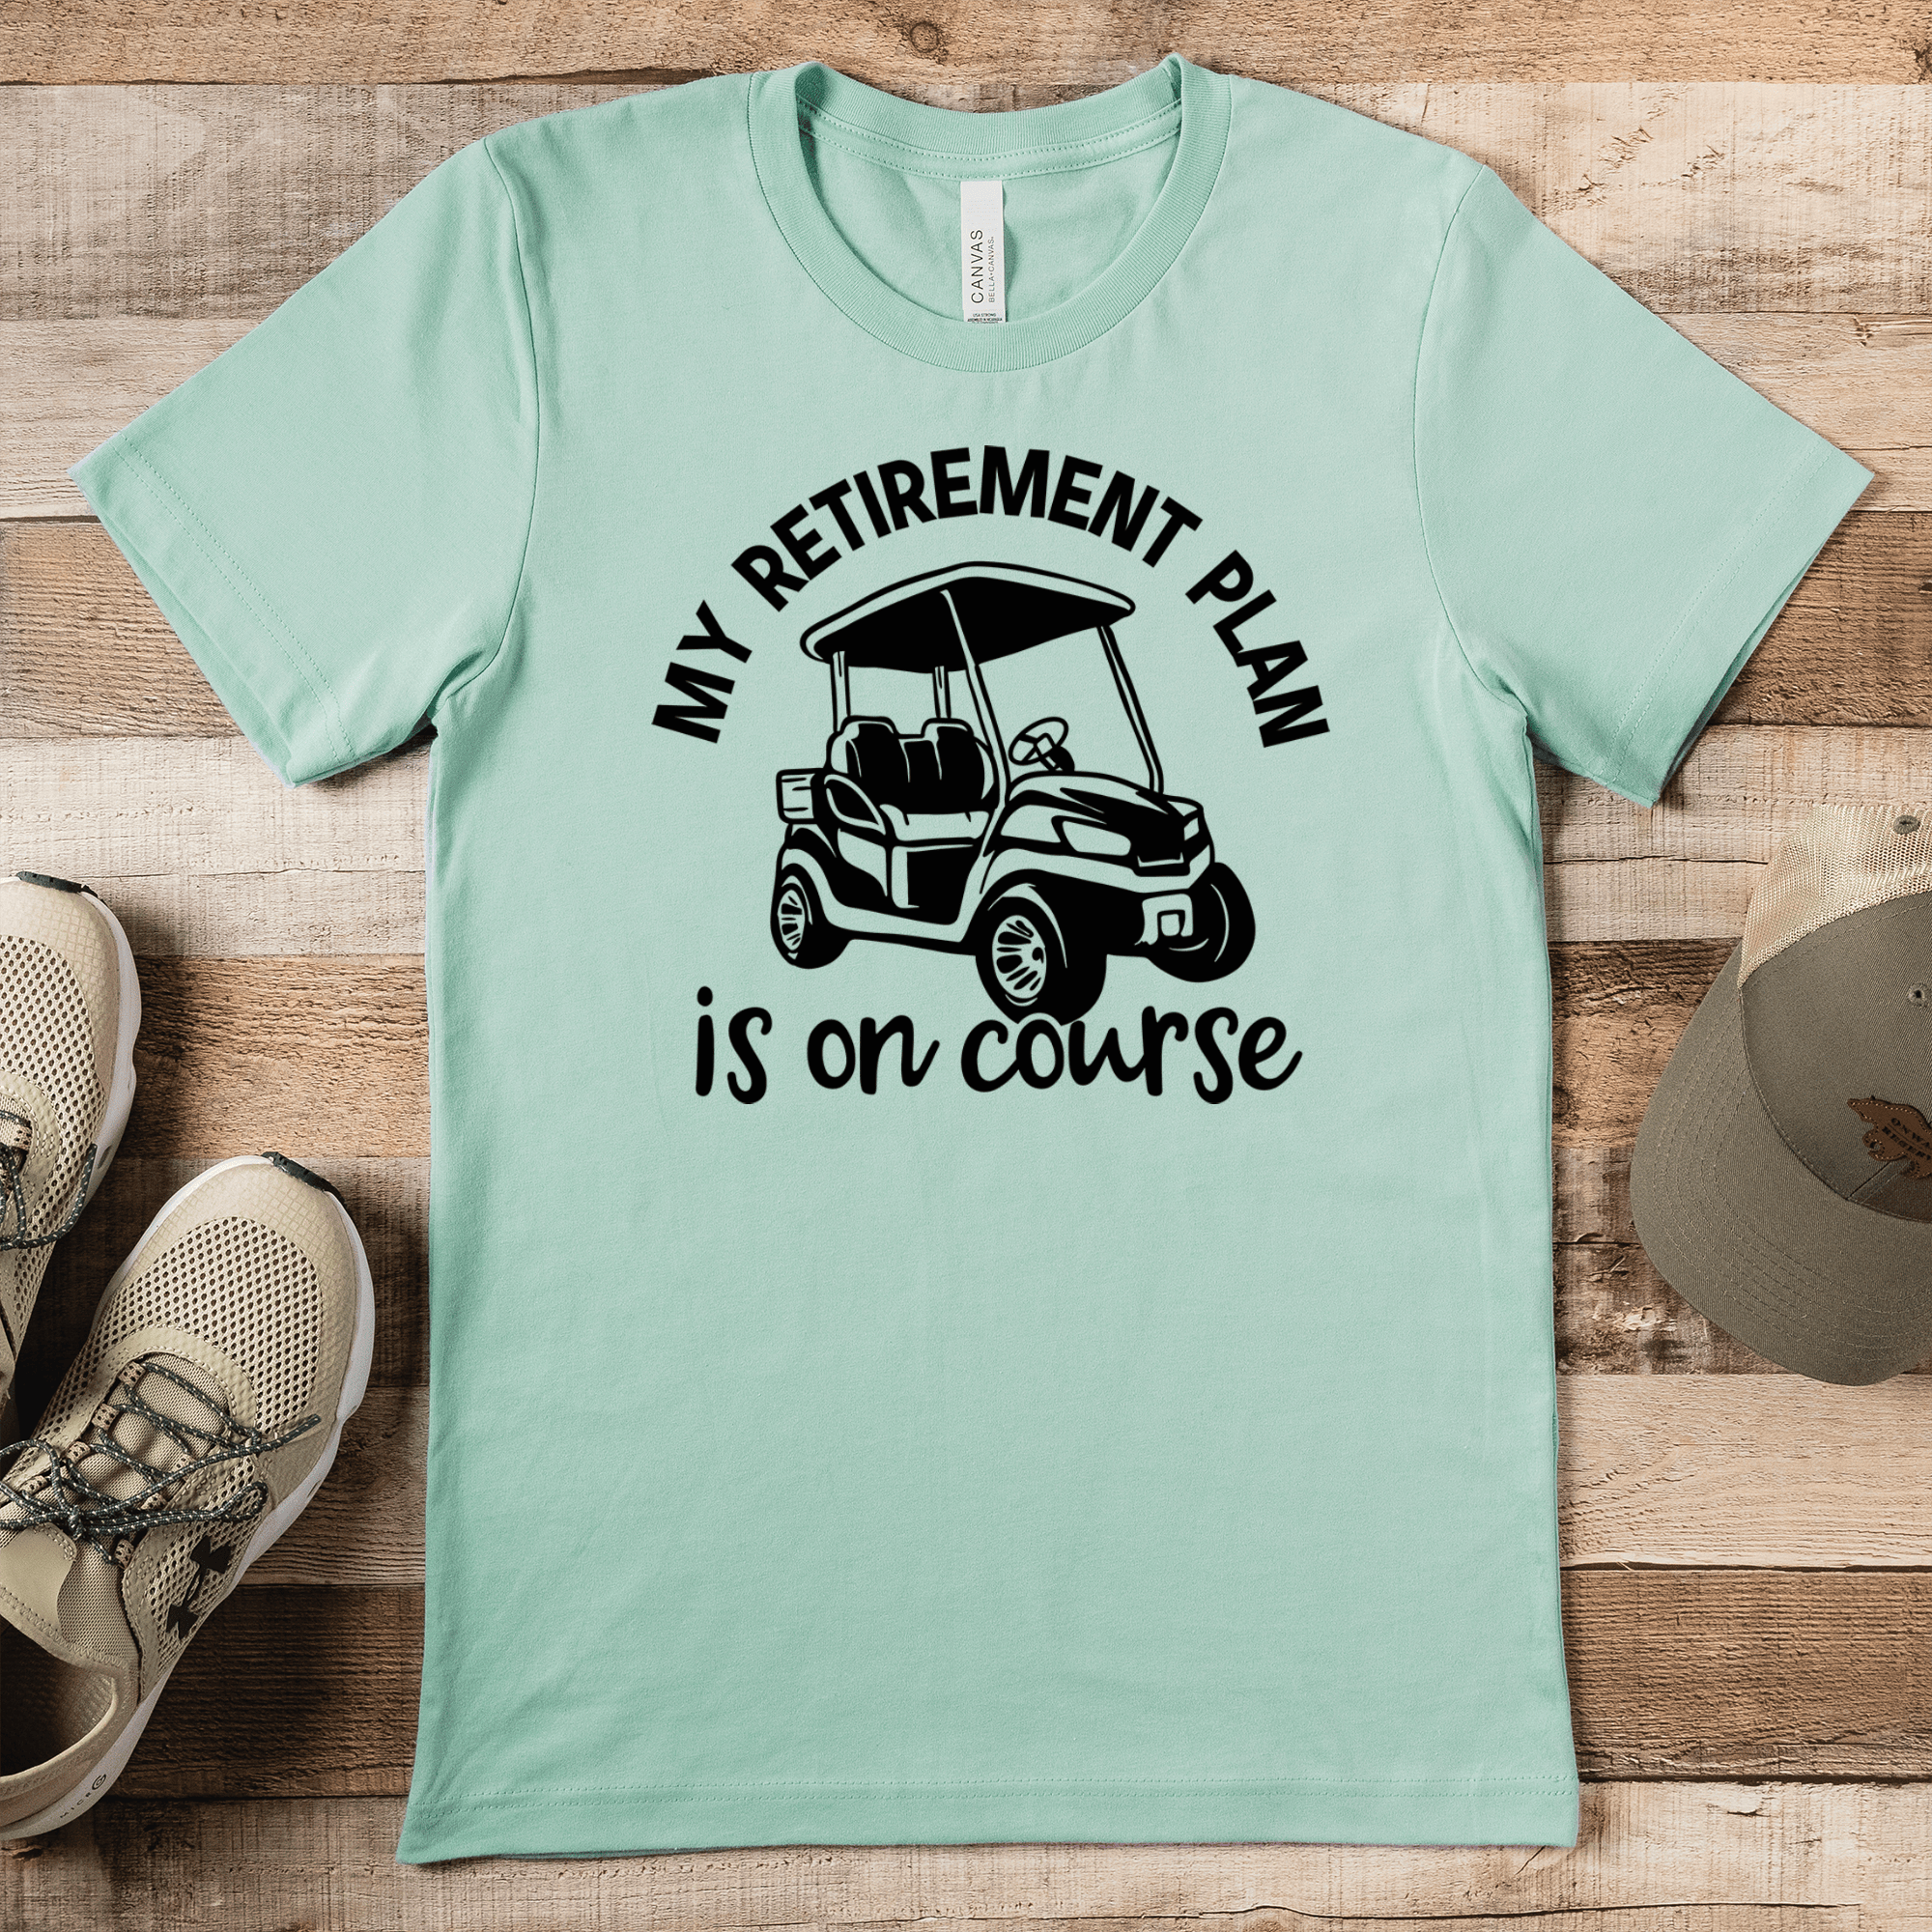 Light Green Mens T-Shirt With My Retirement Plan Is On Course Design